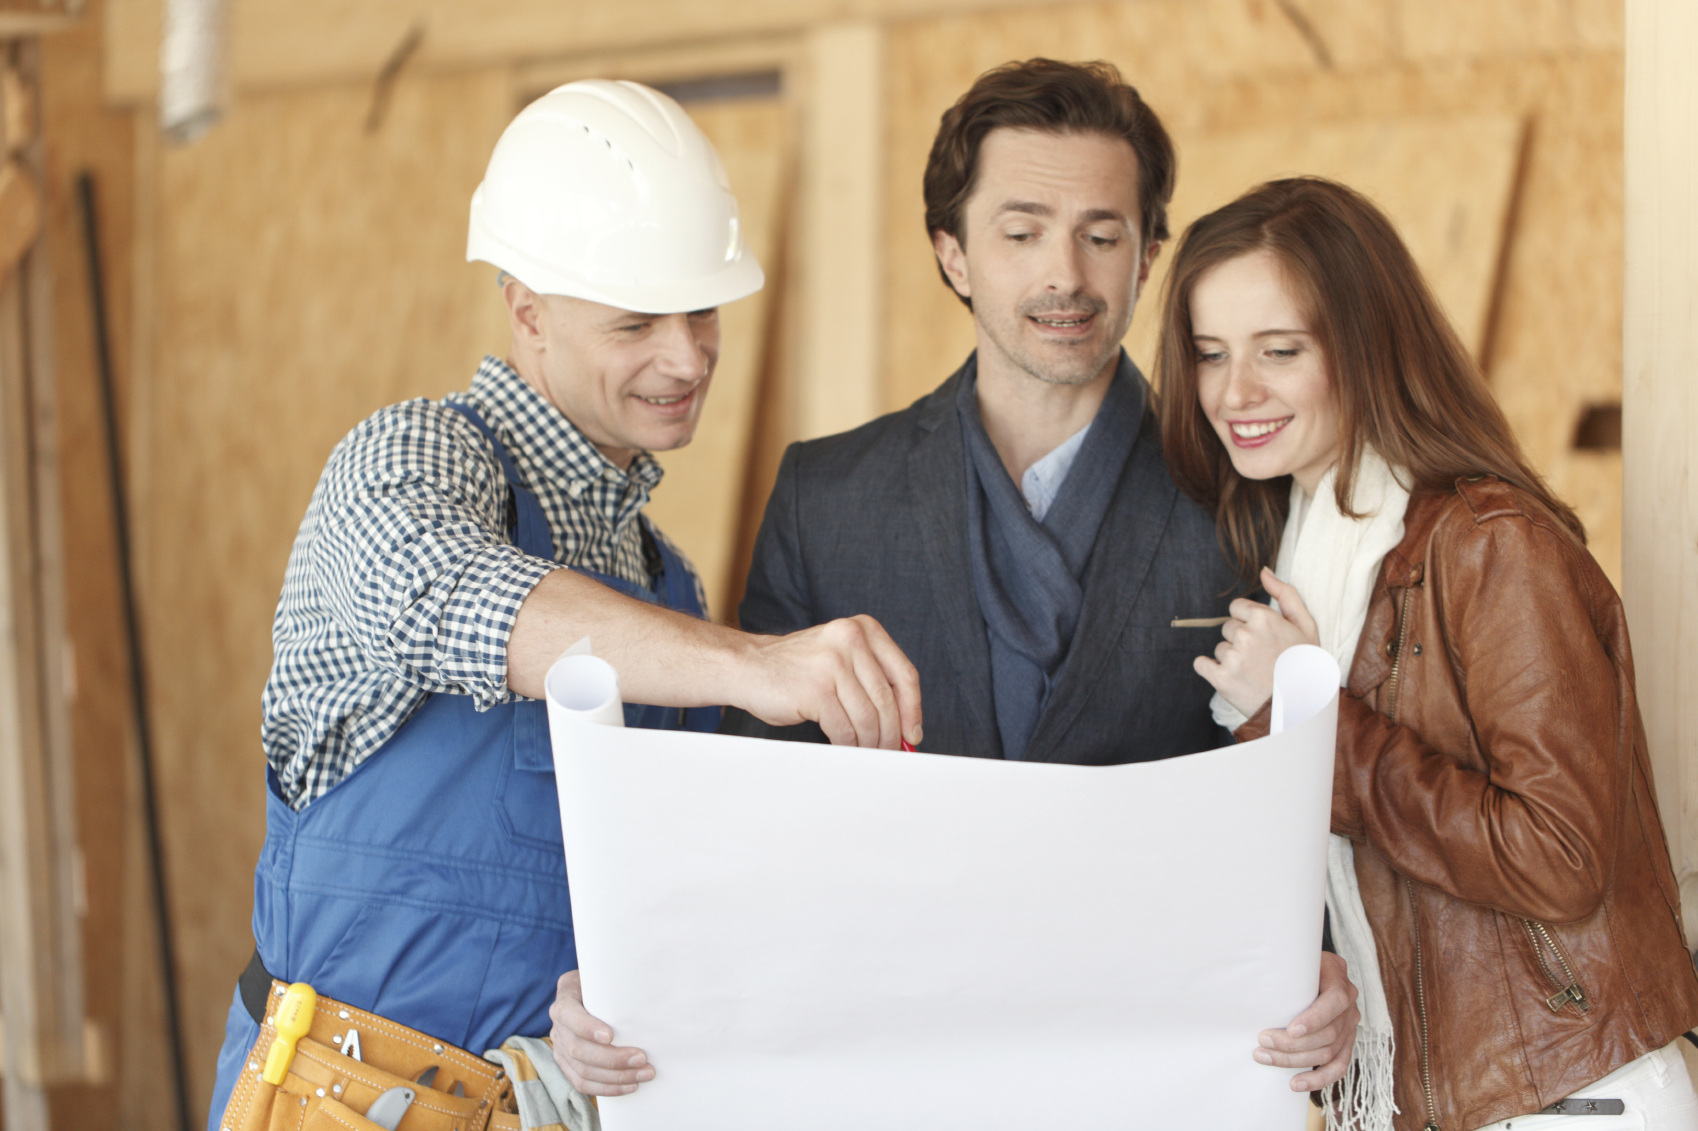 Worker shows house design plans to a young couple at construction site